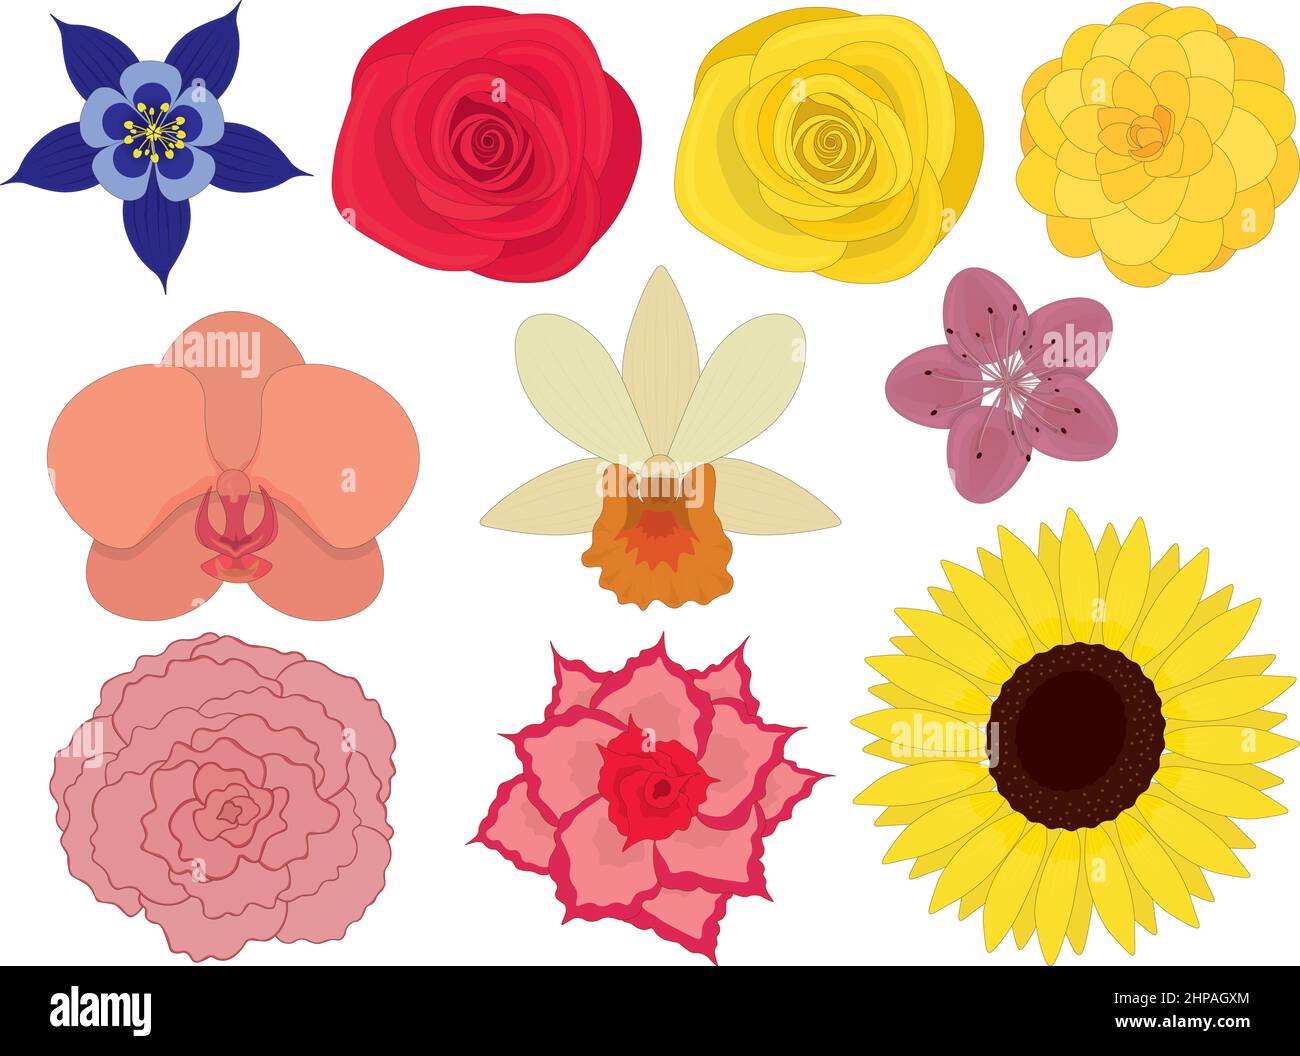 Varicoloured bright flowers collection vector illustration Stock Vector